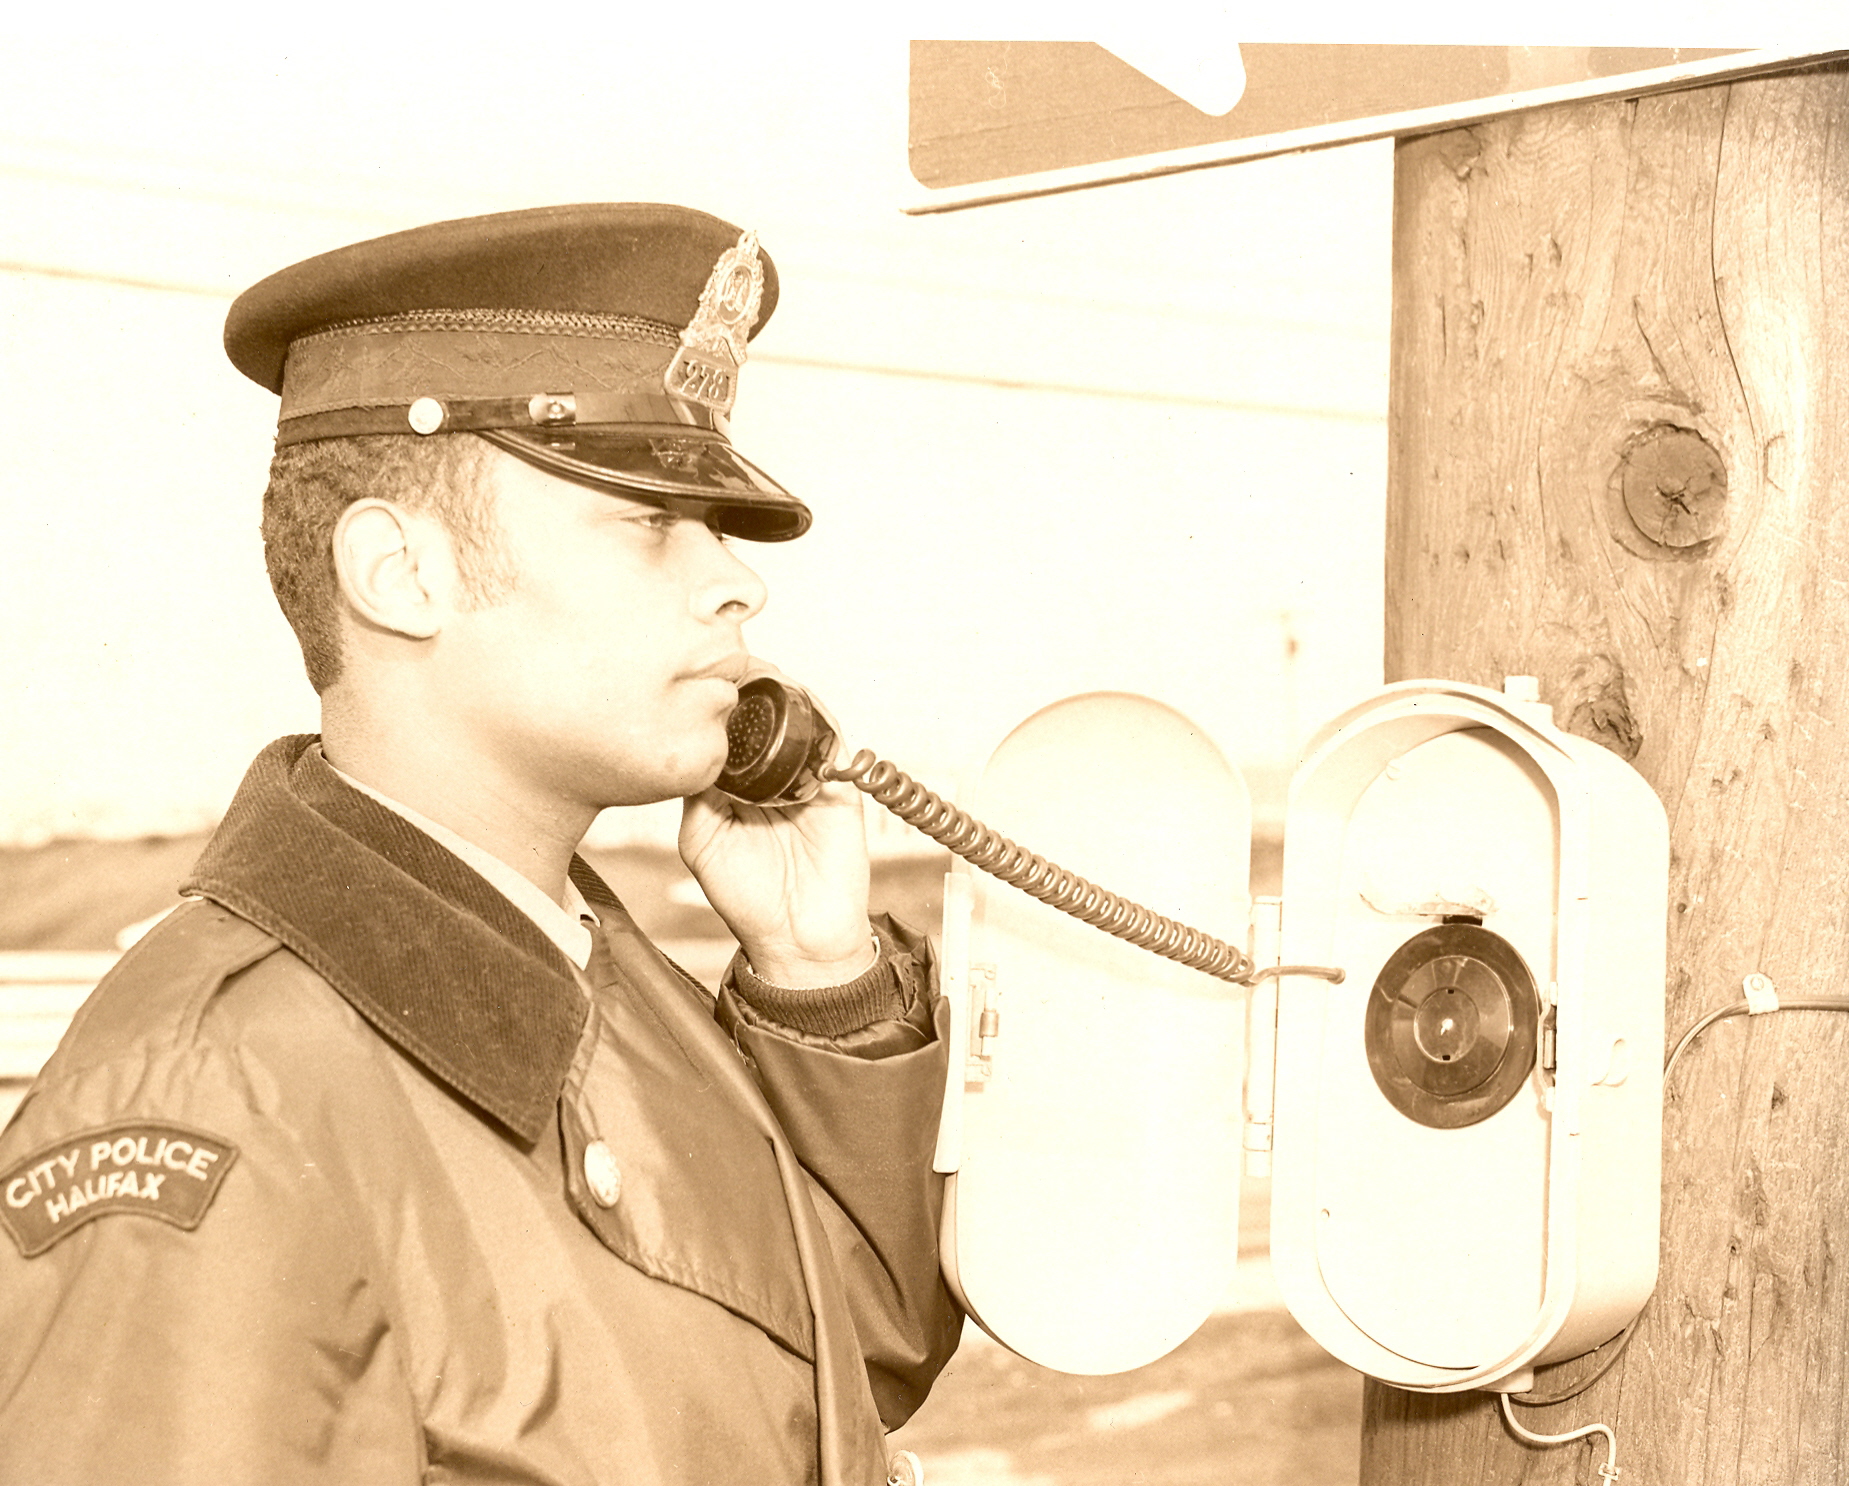 Black and white photo of African Nova Scotian officer using call-box